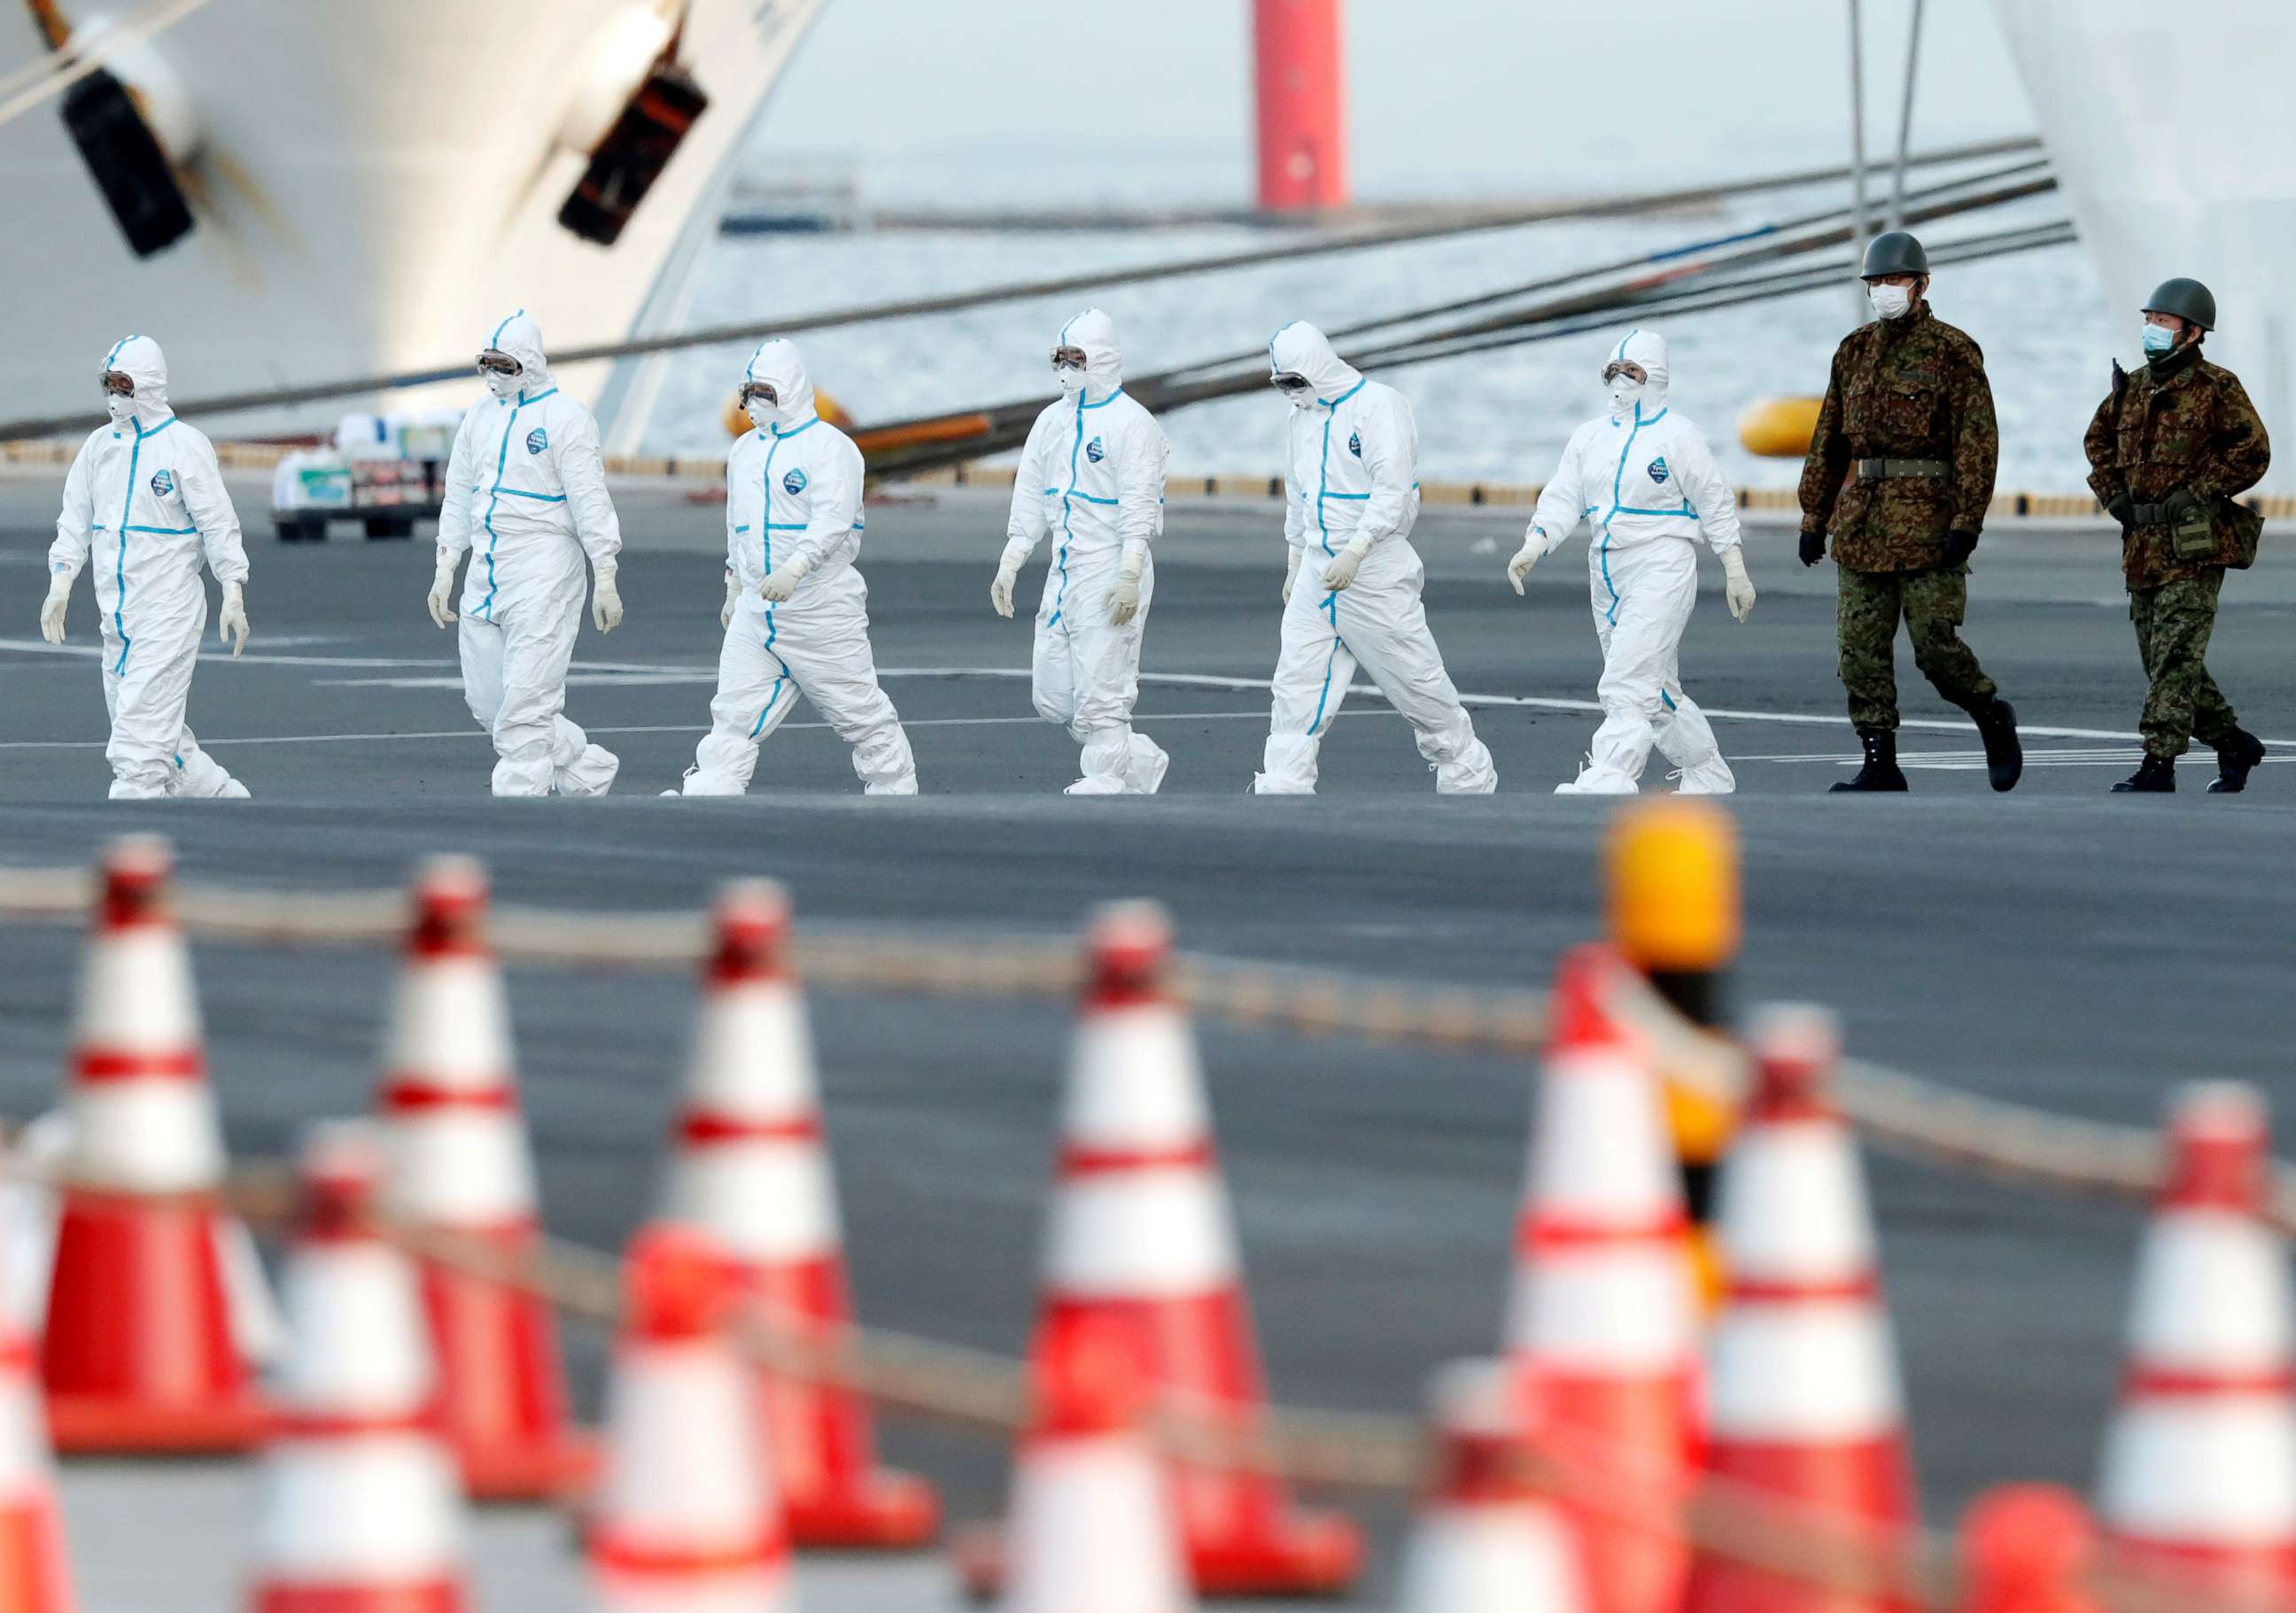 PHOTO: Workers and army officers wearing protective suits walk away from the Diamond Princess cruise ship, as they prepare to transfer passengers tested positive for the novel coronavirus, in the Japanese port of Yokohama, Feb. 10, 2020.